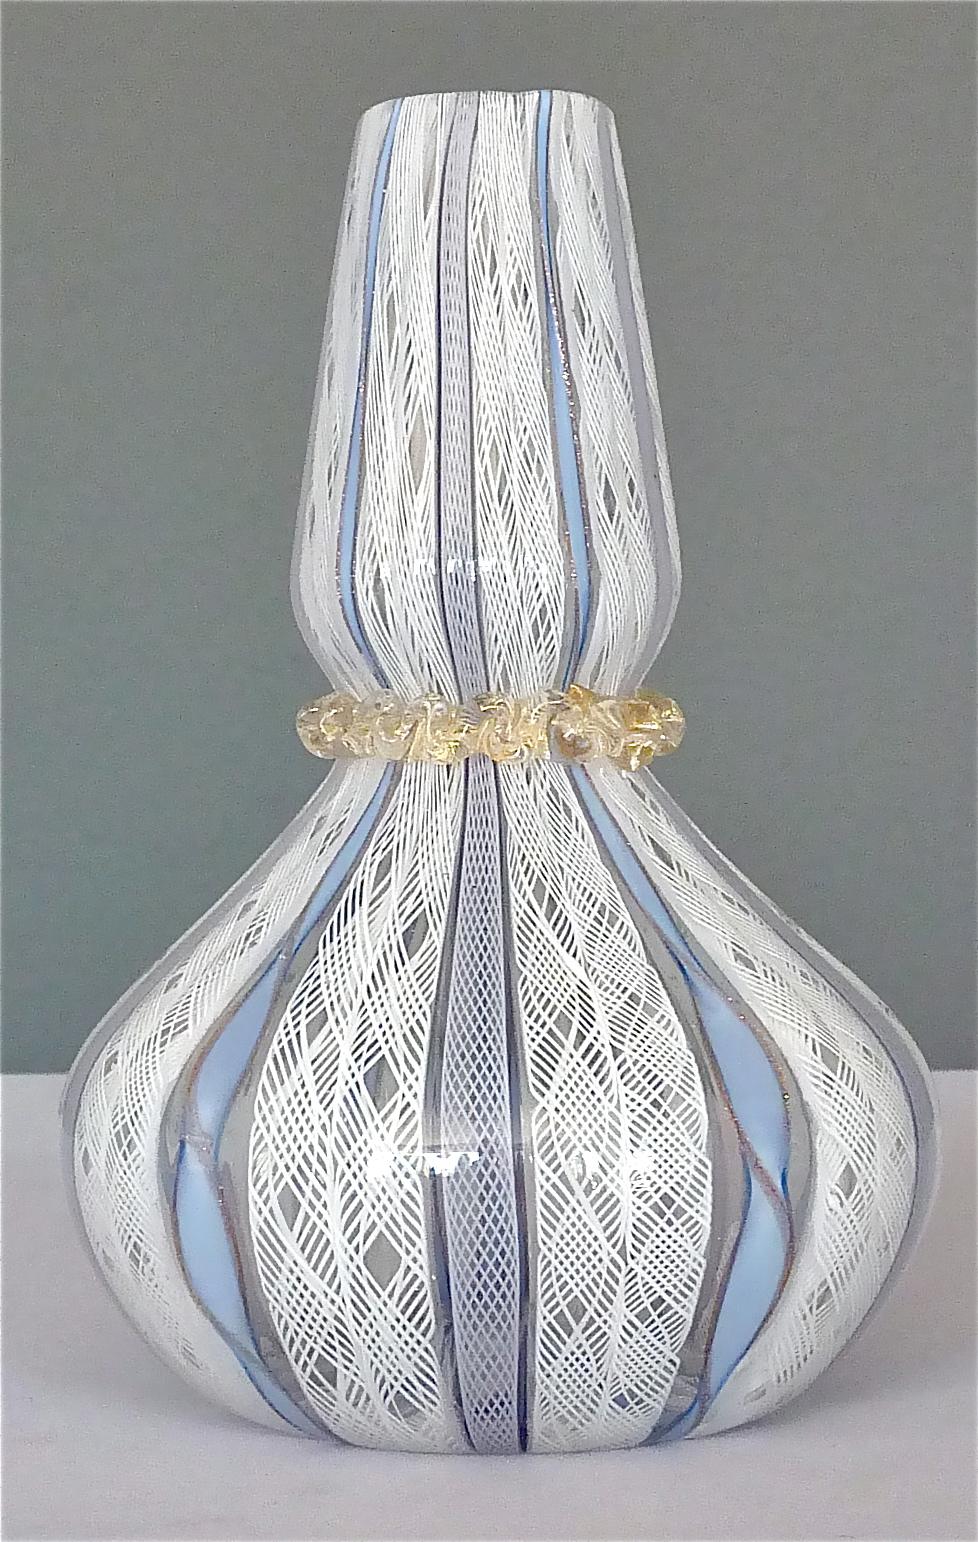 Dino Martens Vase for Aureliano Toso White Blue Murano Art Glass, Italy, 1950s For Sale 7